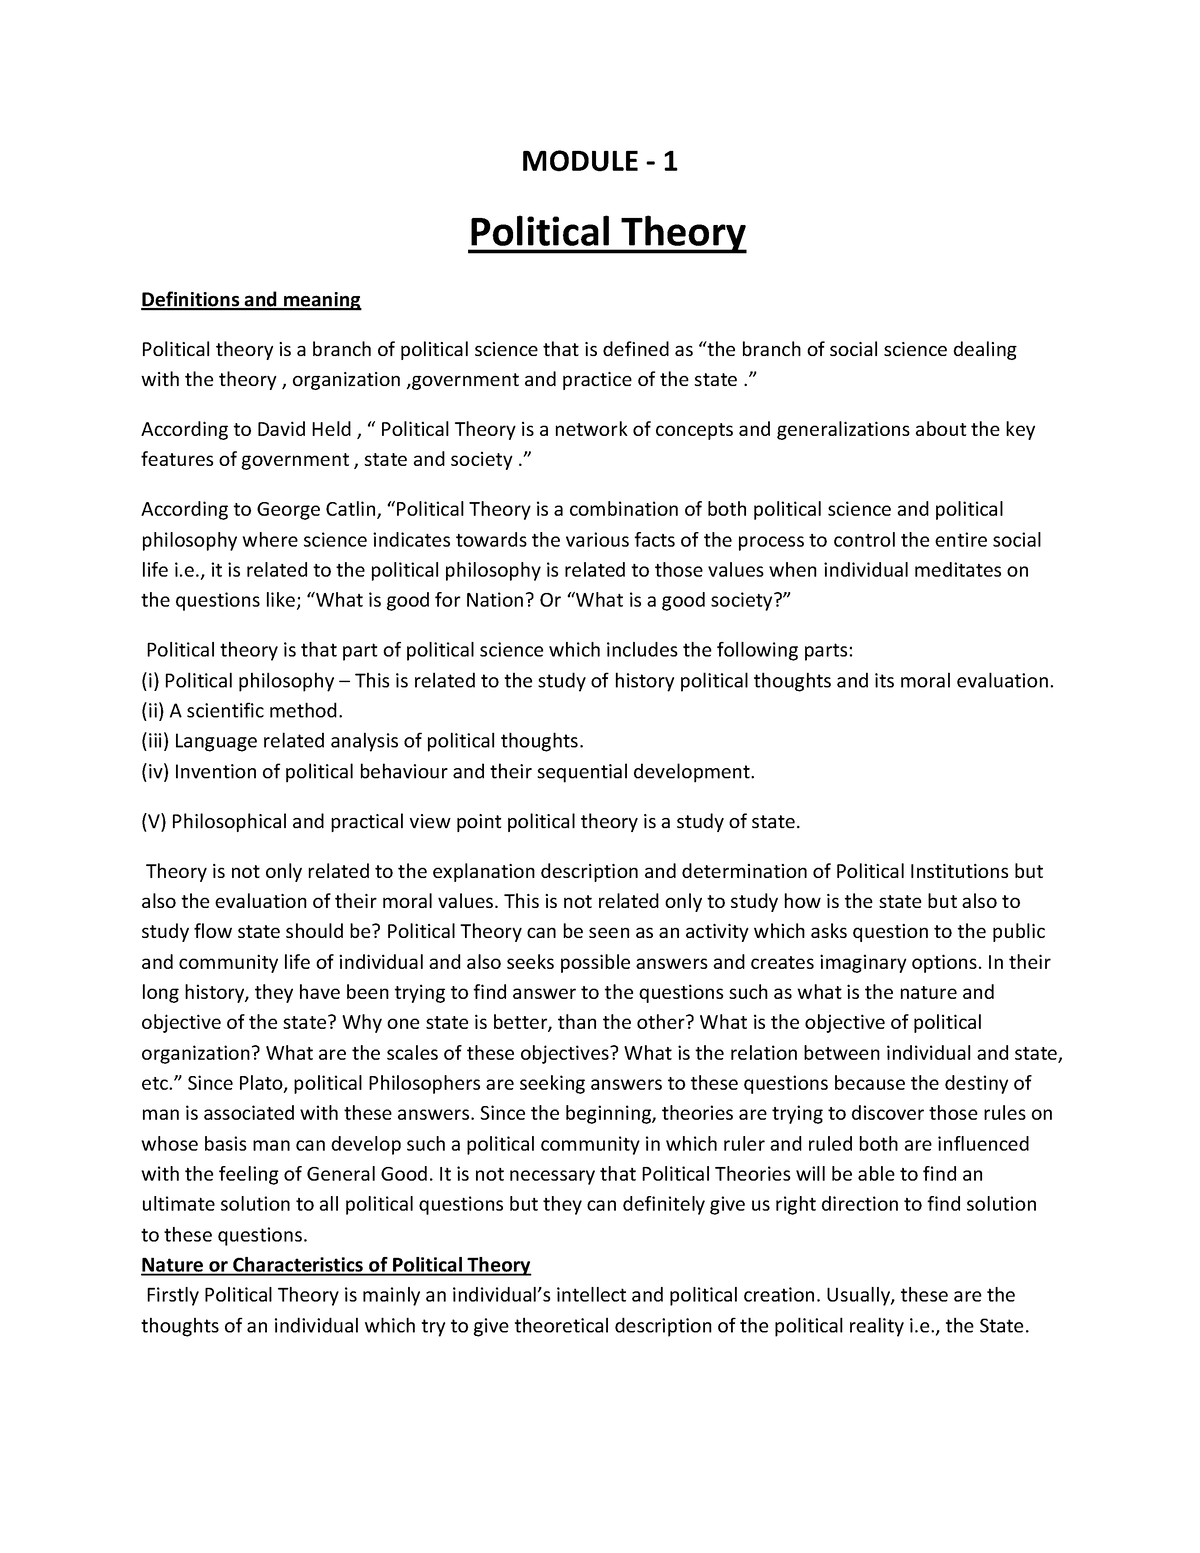 write an essay on kinds of political theory